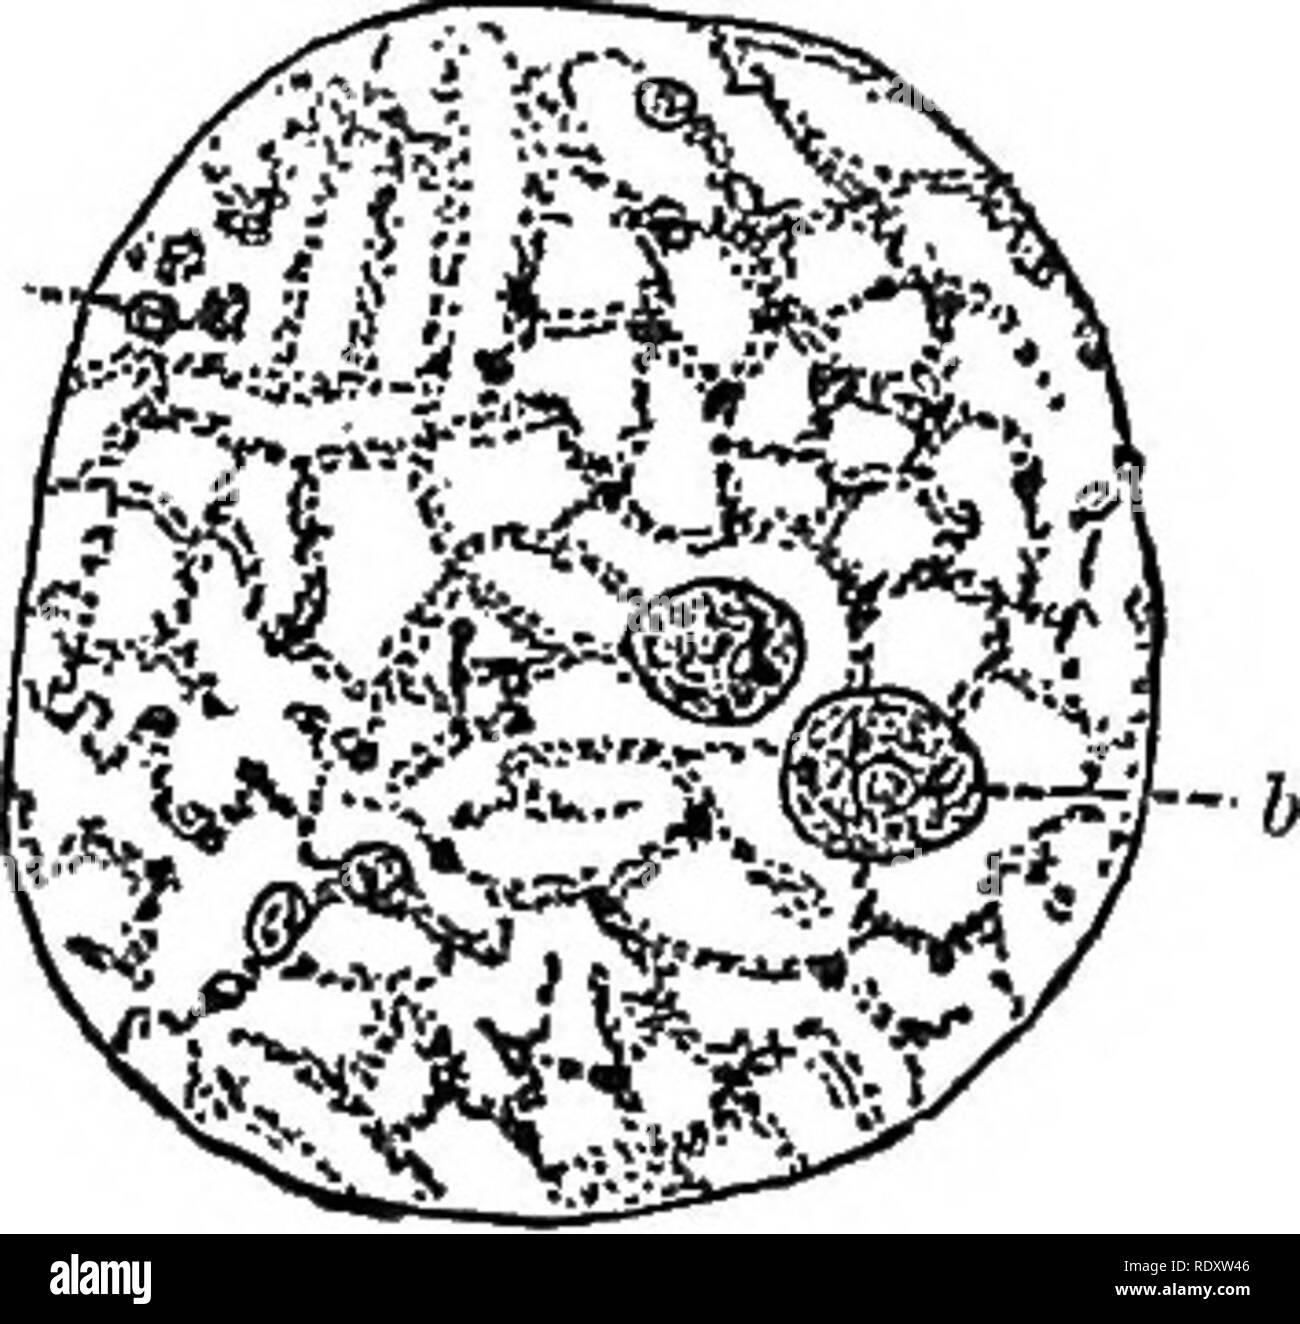 . An introduction to vegetable physiology. Plant physiology. Fie. 7.âCells feom the Leaf of Elodea. x 300. Â«, nucleus; p, protoplasm, in which are embedded numerous chloro- piasts. The arrows show the direction of the movement of the protoplasm. Fig. 8.âTwo Cells fbom a â Staminal Haib of Trades- cantia. x 300. The arrows show the direction of the movement of the protoplasm. movements are spoken of as rotation when the current flows uniformly round the cell, or as circulation when the path has a more complicated course. It has been mentioned that, with very rare exceptions, all cells contain  Stock Photo